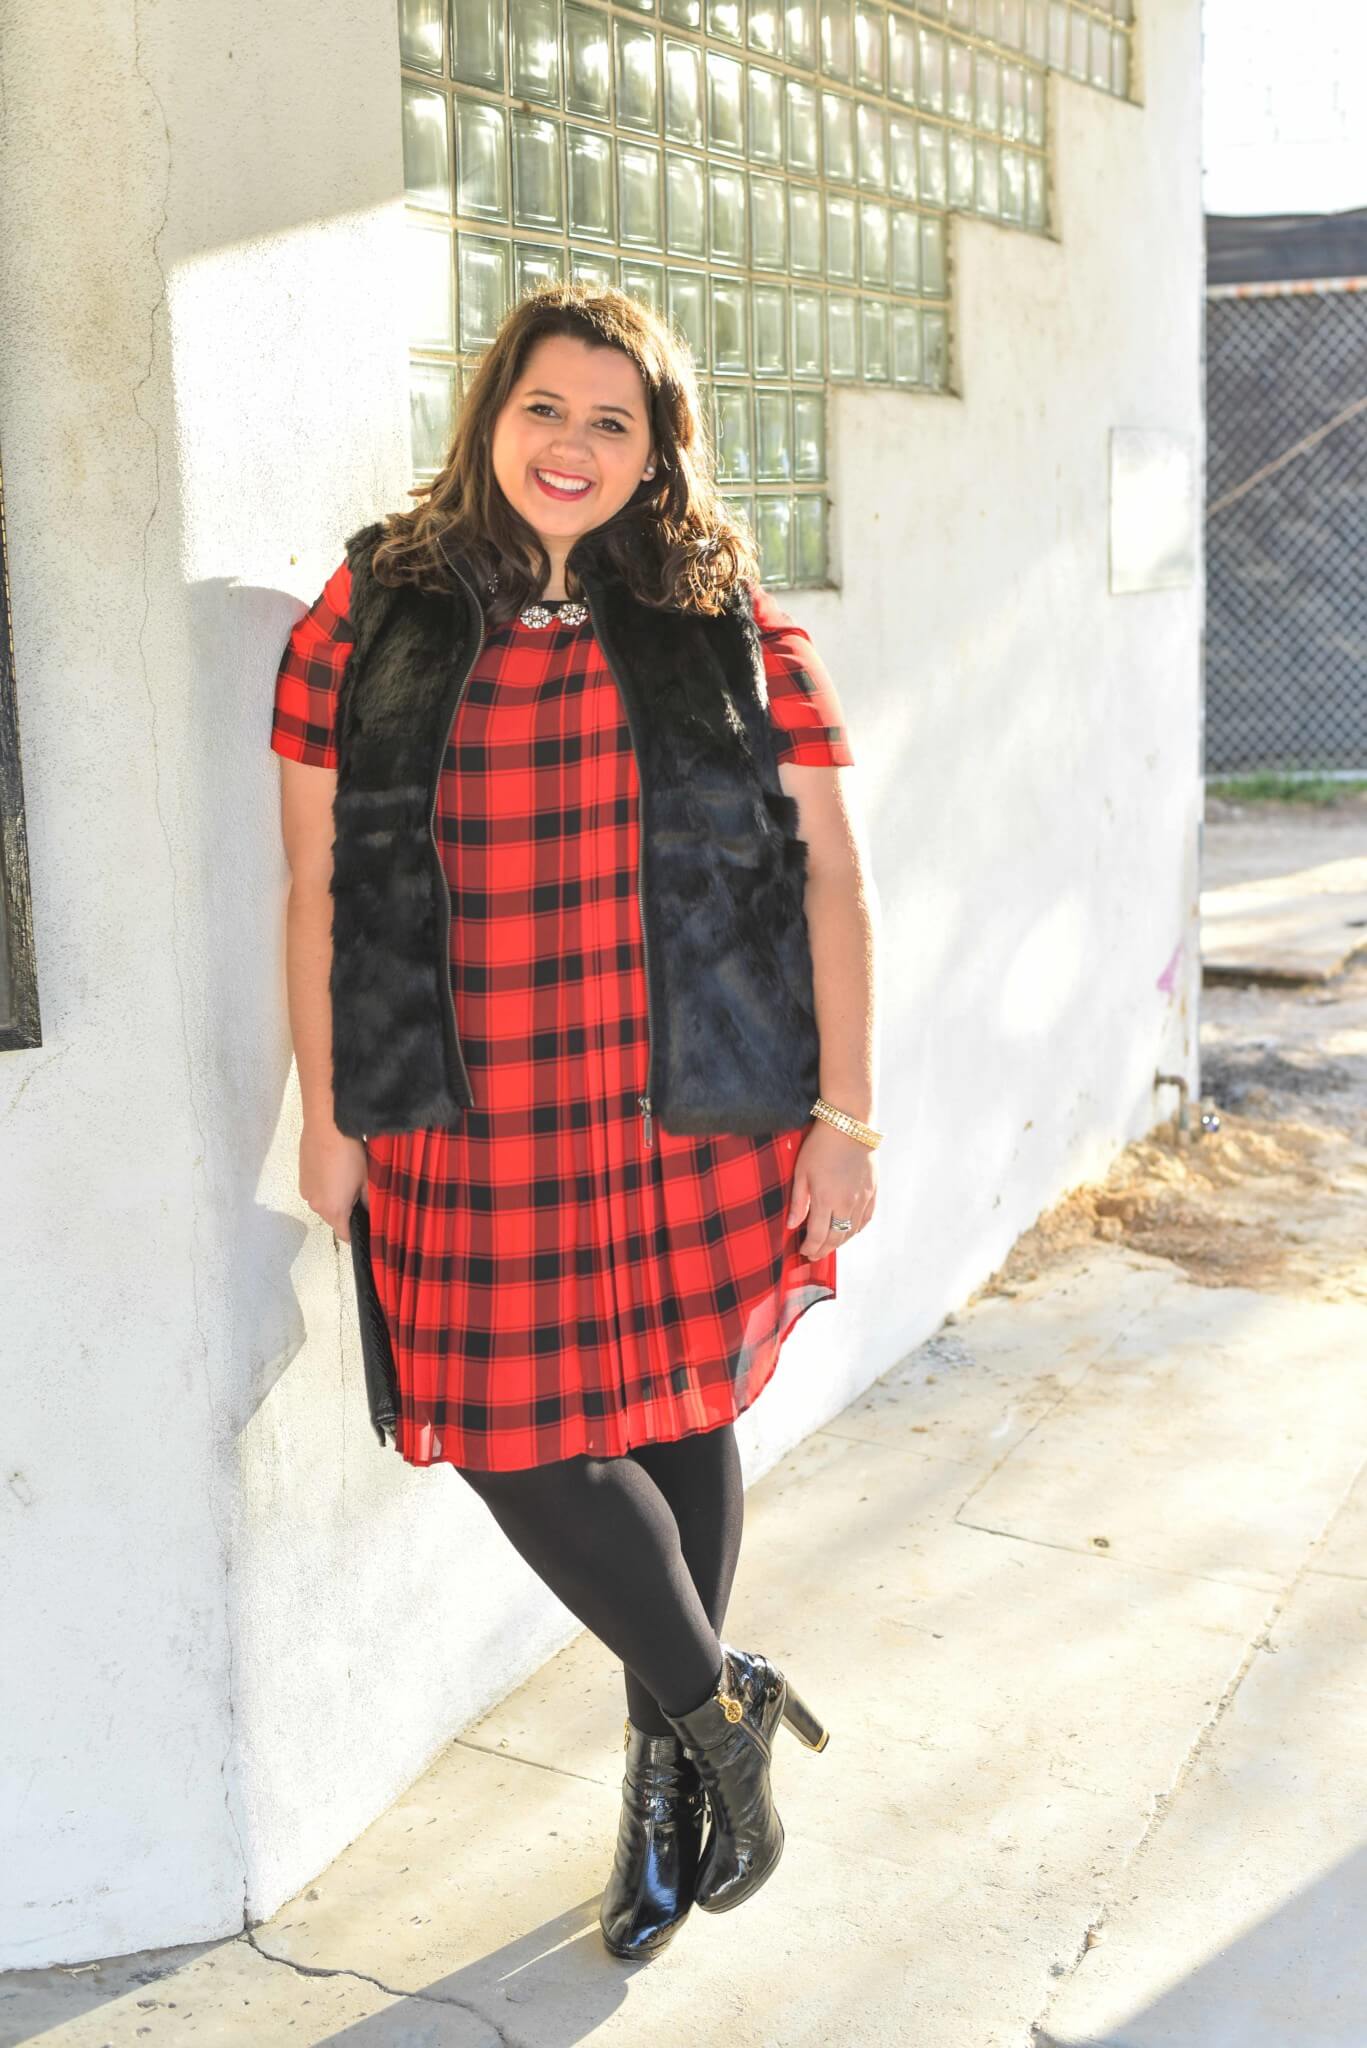 The holidays can be stressful, but having a casual holiday party look planned out and ready to go is one way to help simplify your to do list. This red buffalo plaid shirt dress and black faux fur vest from Foxcroft make the perfect combination with some glamourous jewlery. - @EmilySGSB - Curvy Style Blogger from Something Gold, Something Blue